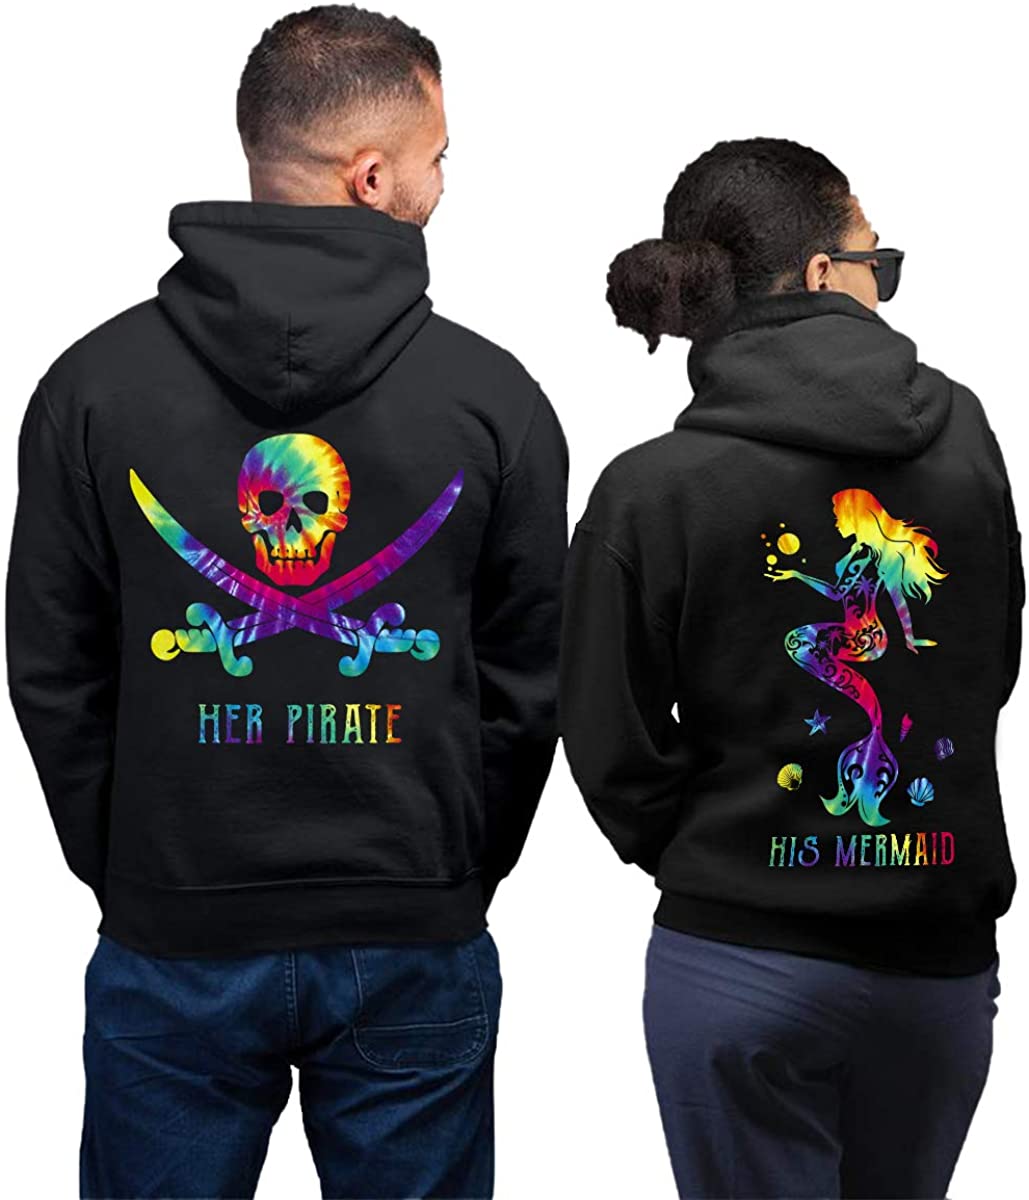 King Queen Skull His Mermaid Her Pirate Hoodies For Couples